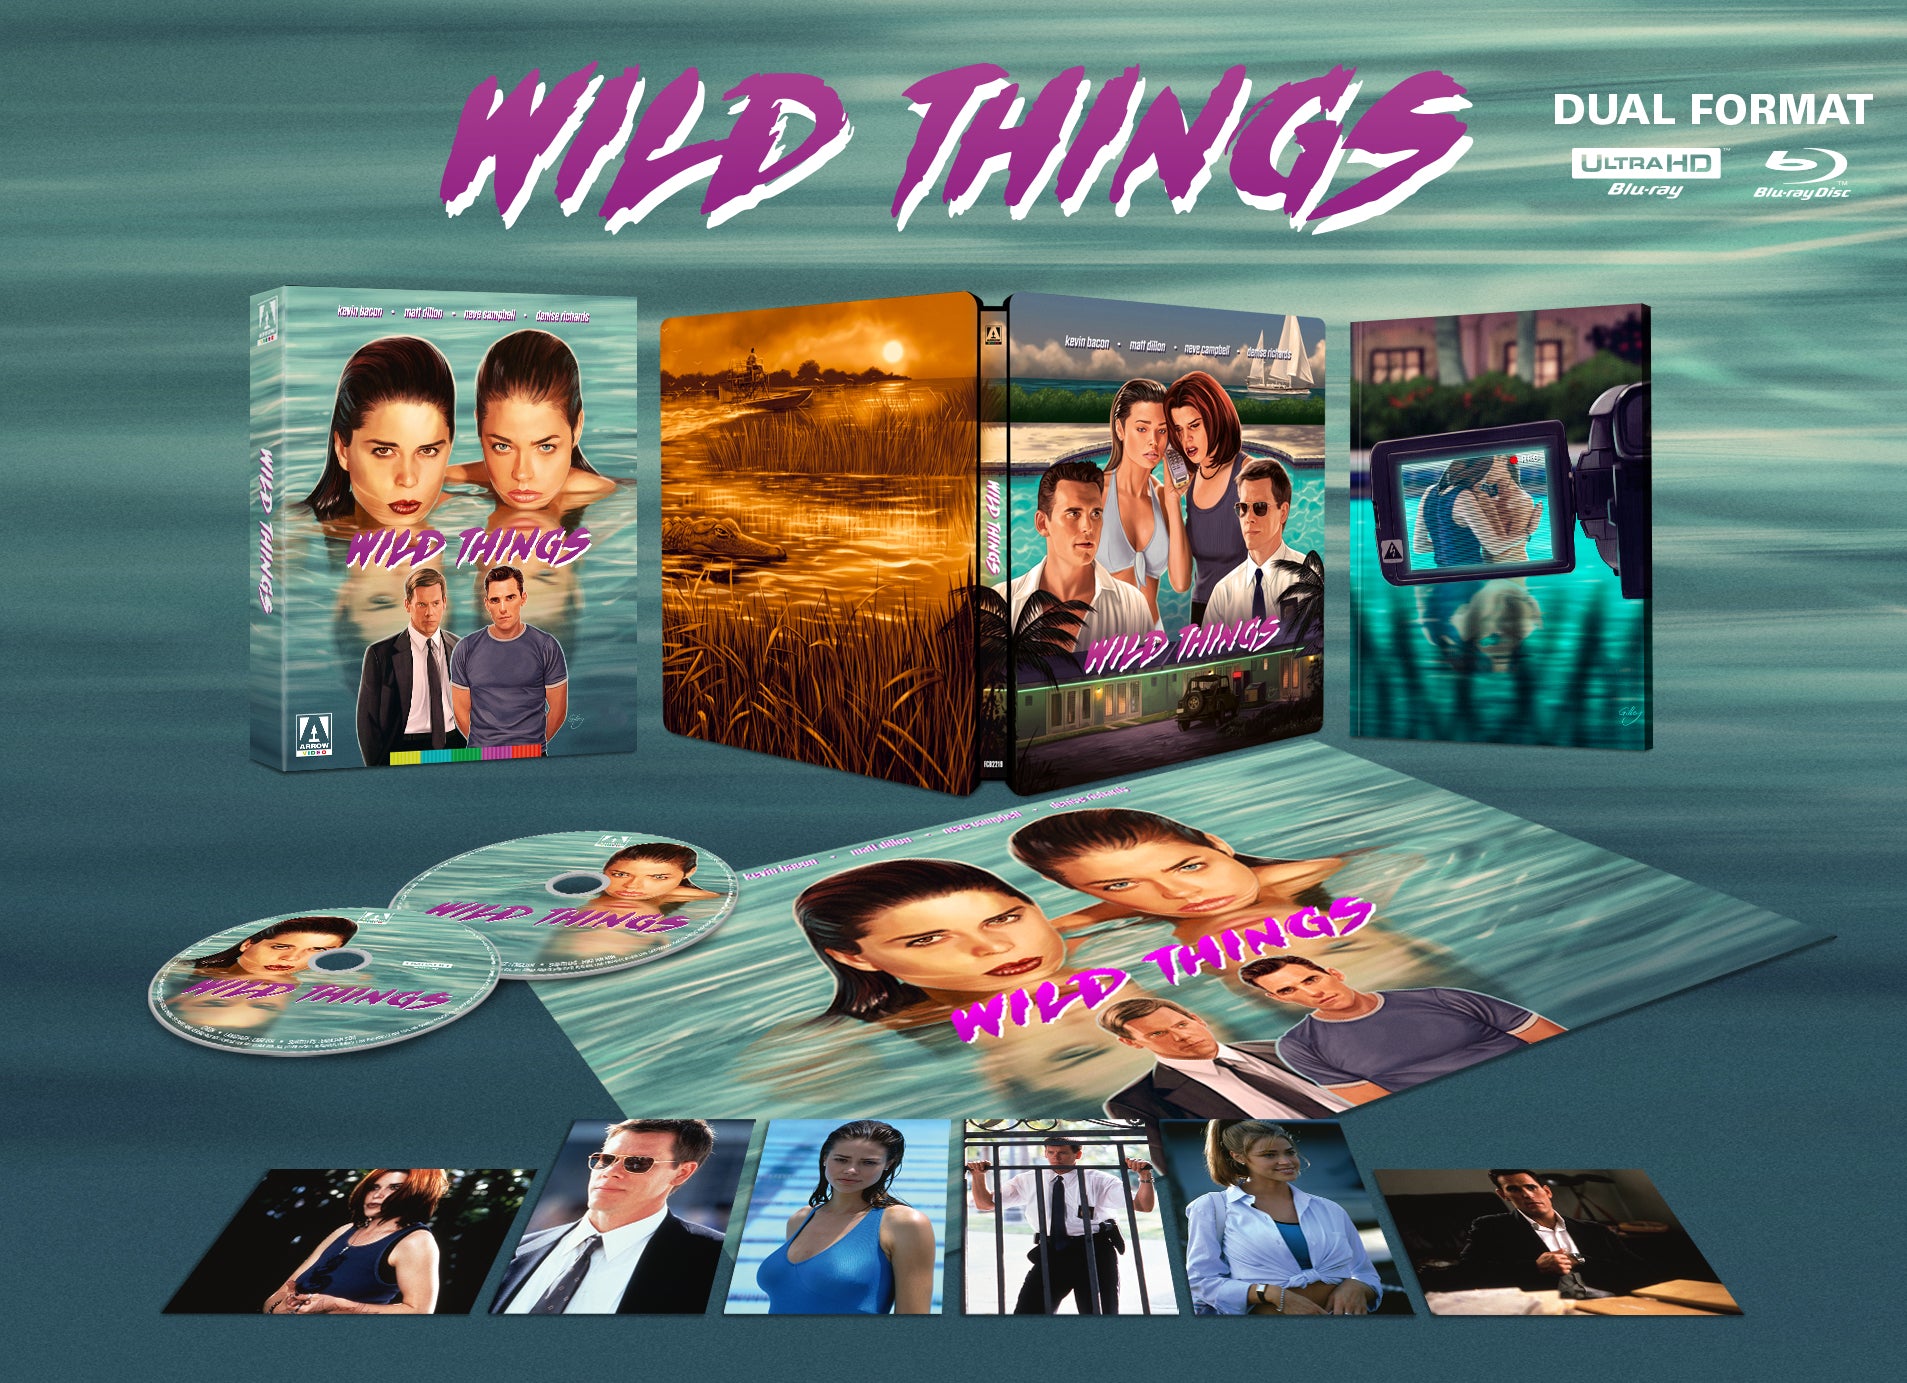 WILD THINGS (DELUXE LIMITED EDITION - EXCLUSIVE) 4K UHD/BLU-RAY STEELBOOK